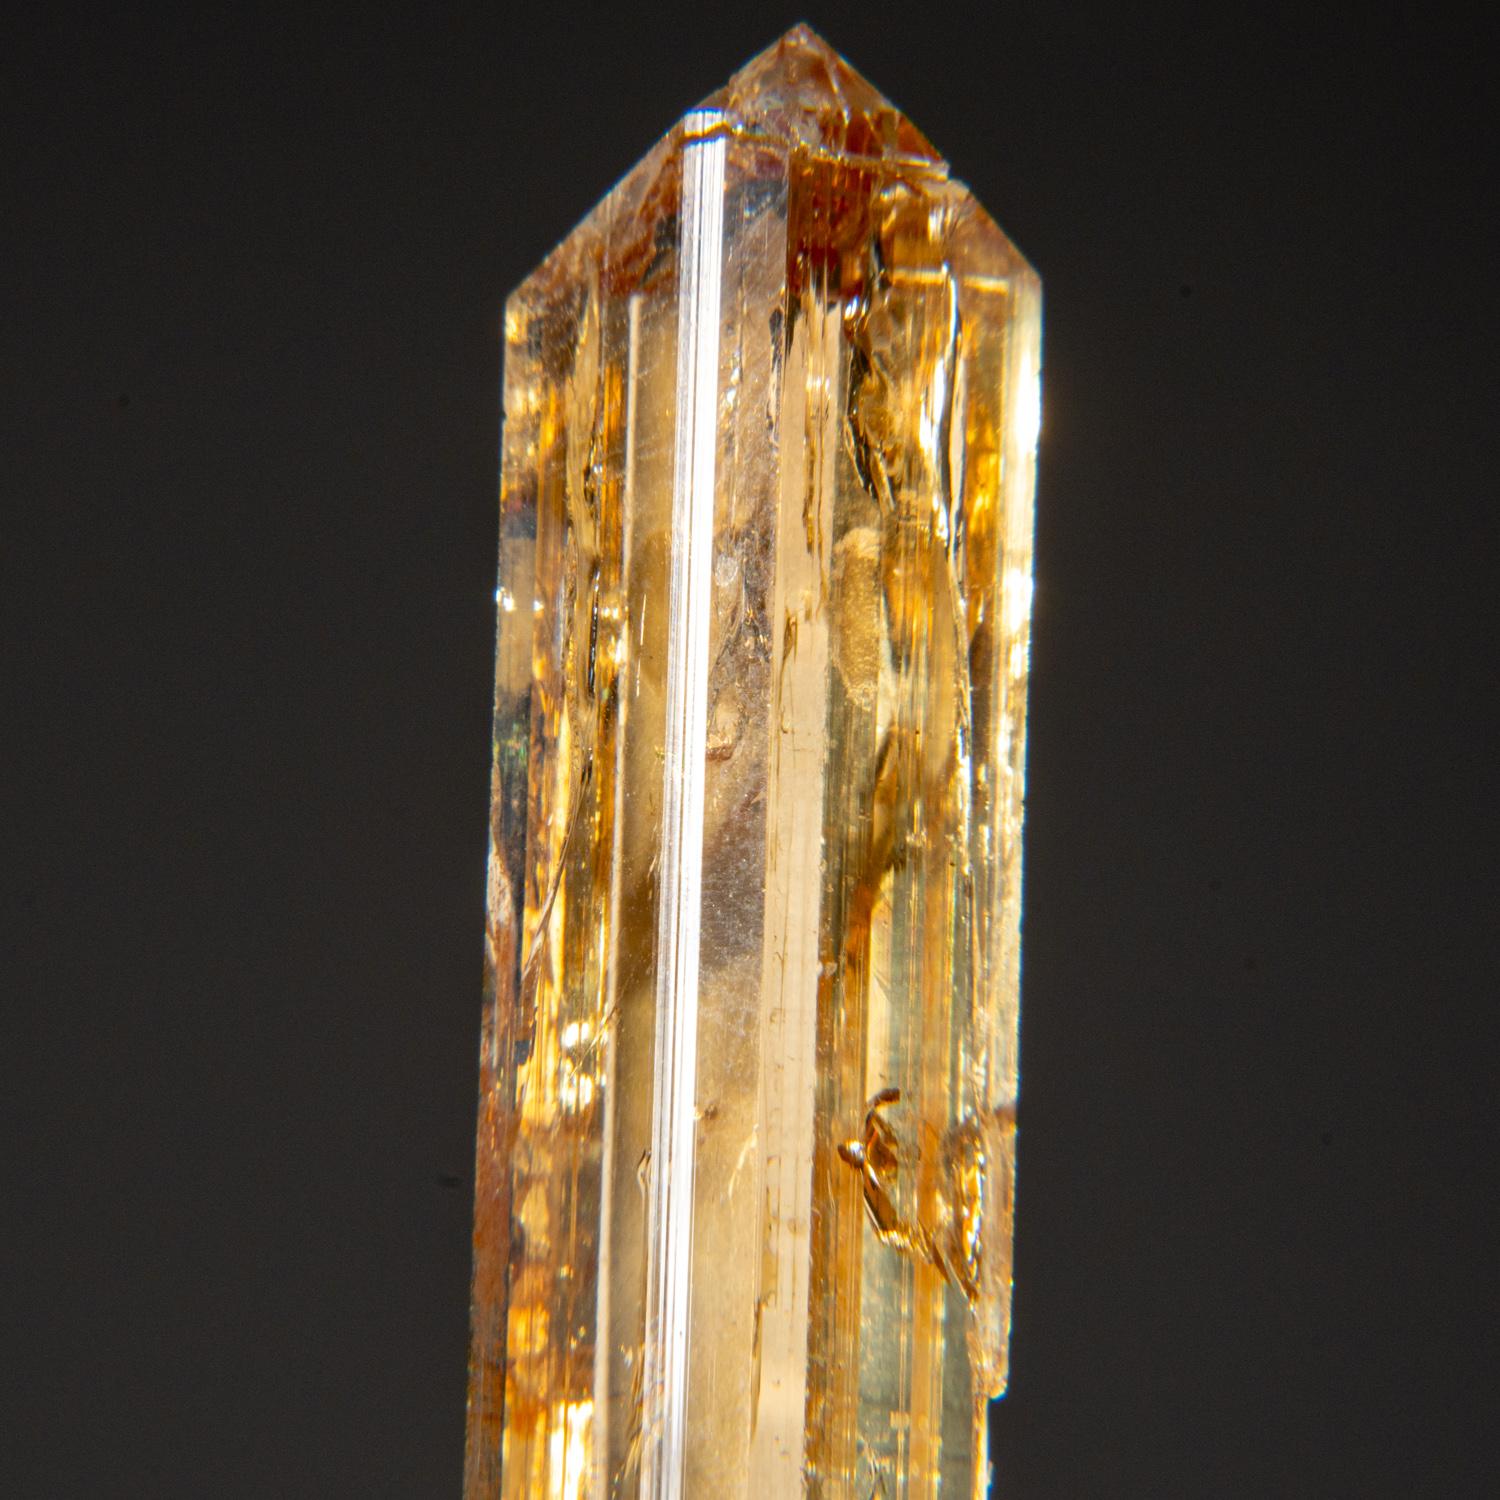 From Kunar, Afghanistan

Large single crystal of transparent sherry colored Topaz with sharp complex basal pinacoid terminations. Crystal is well formed with glassy luster faces.

 

Weight: 15.2 grams, Size: .5 x .25 x 2.5 Inches